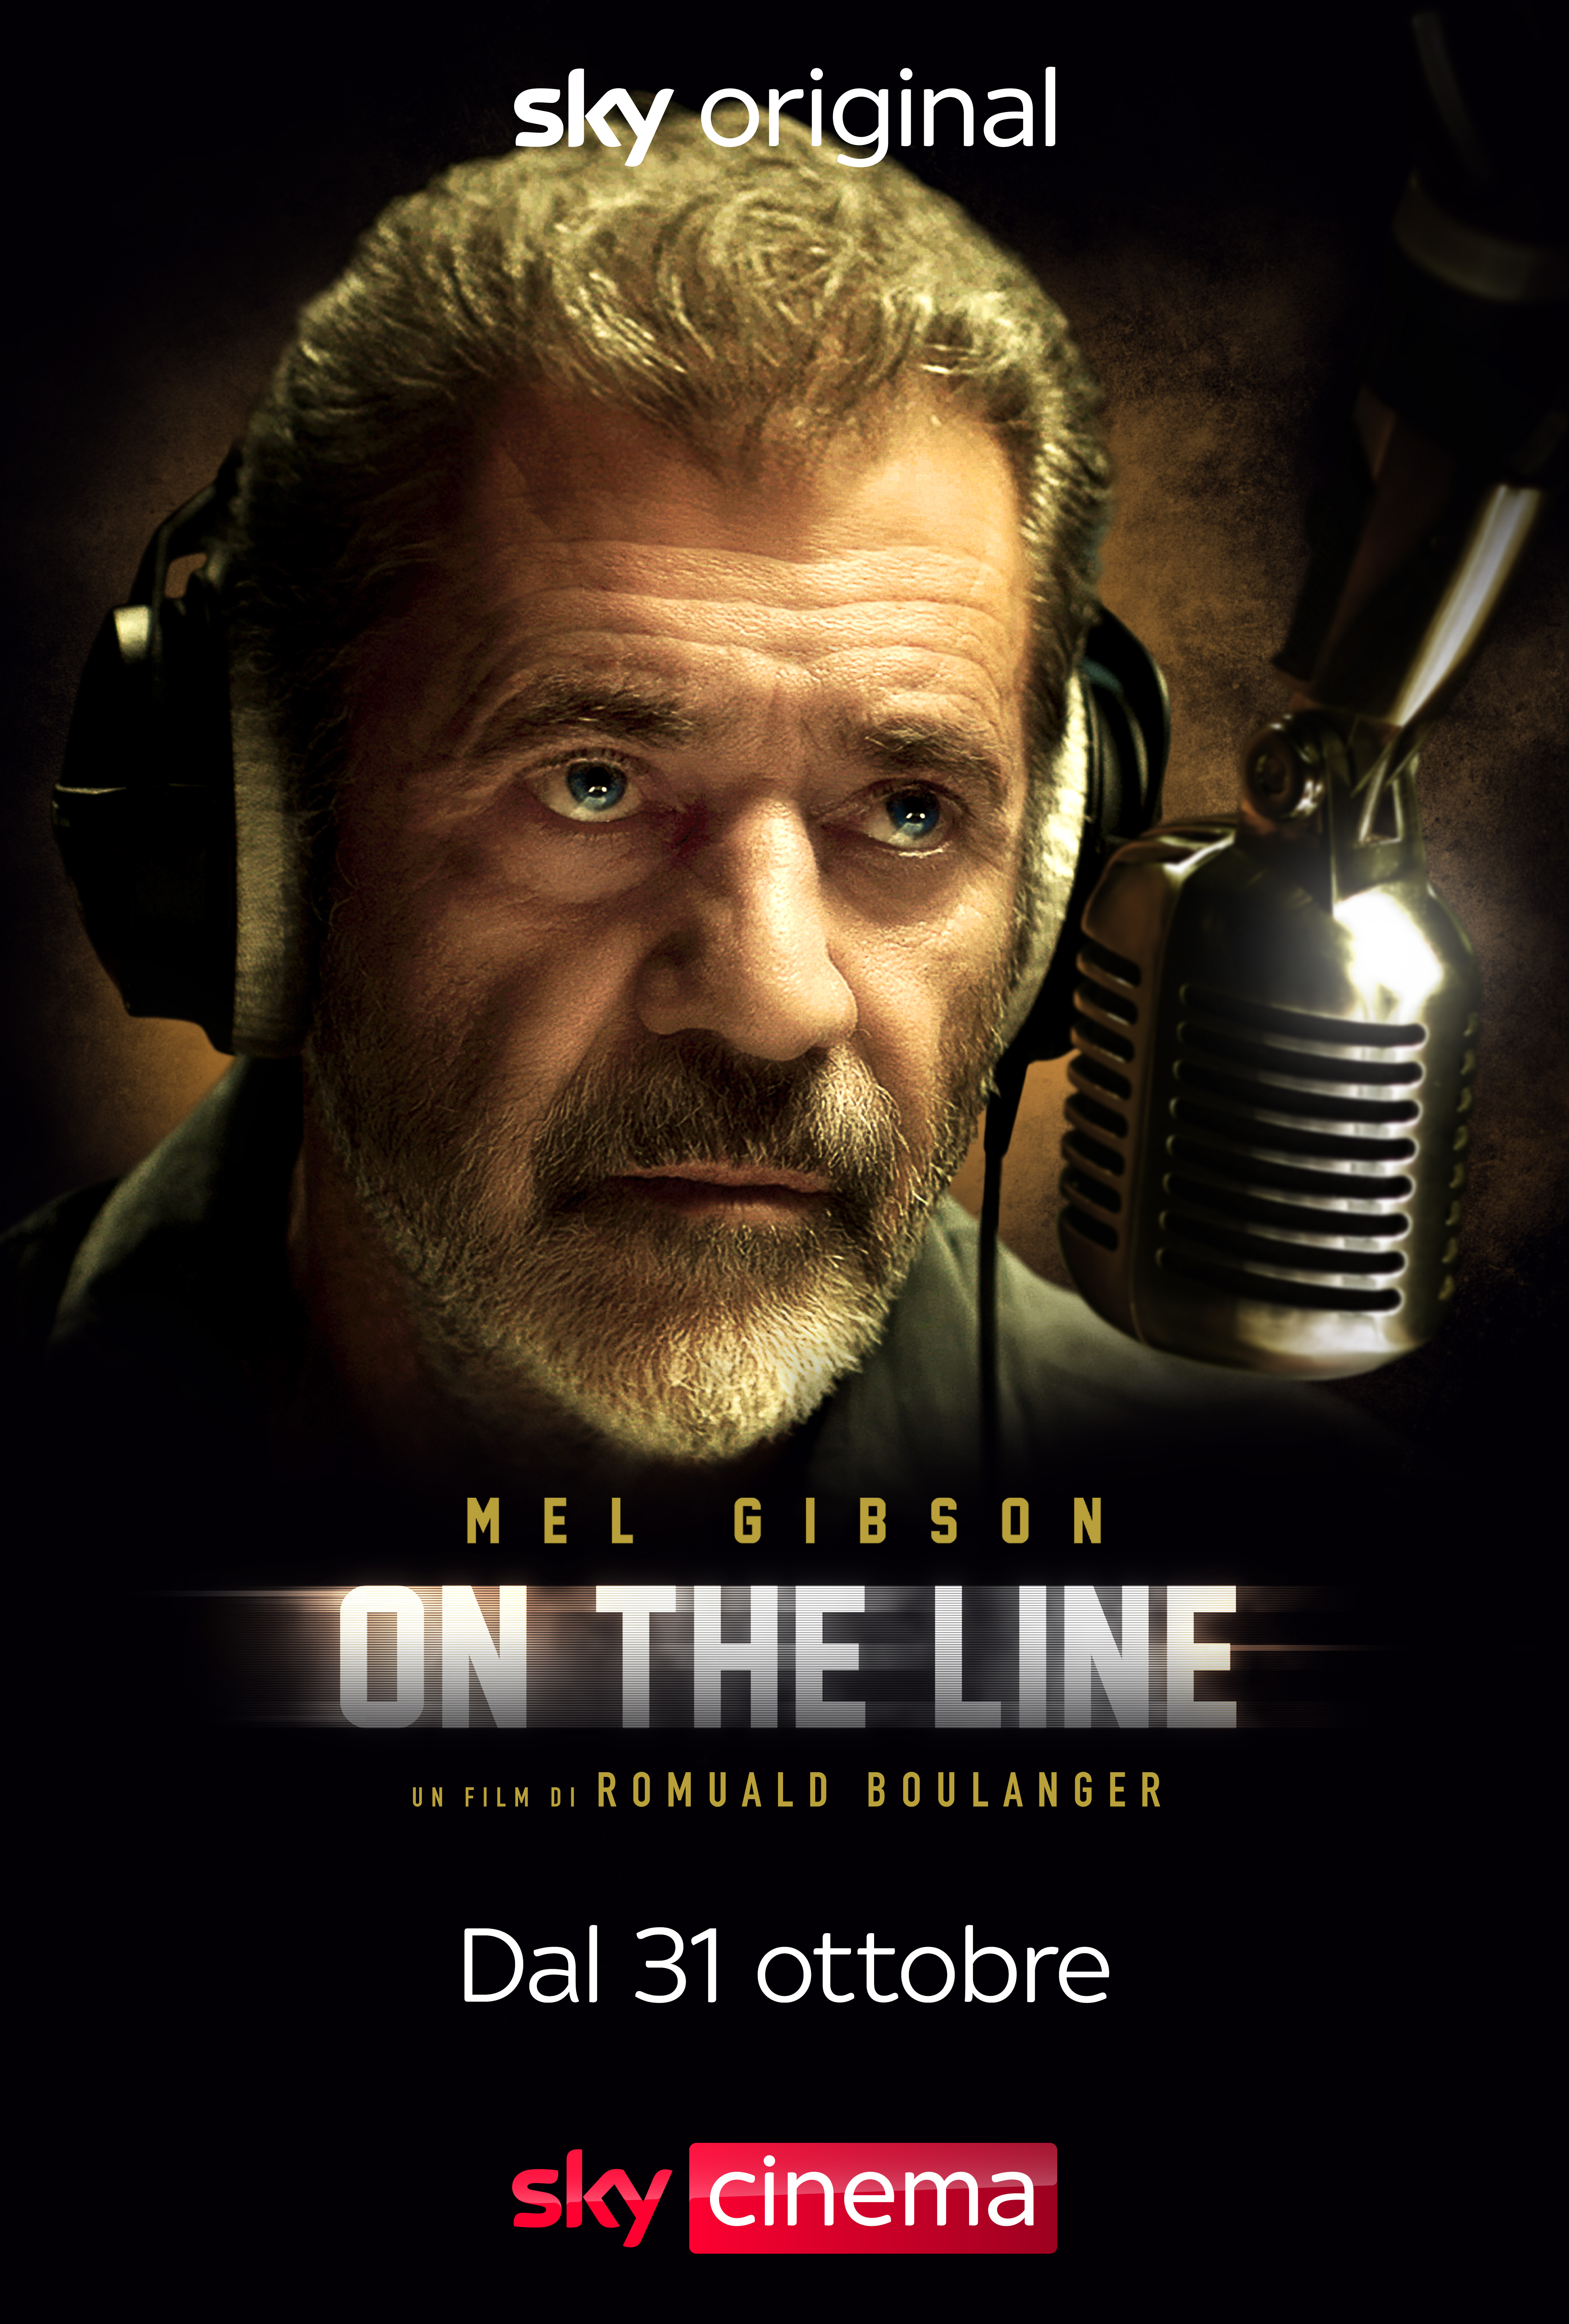 mel gibson nel poster di on the line - nerdface